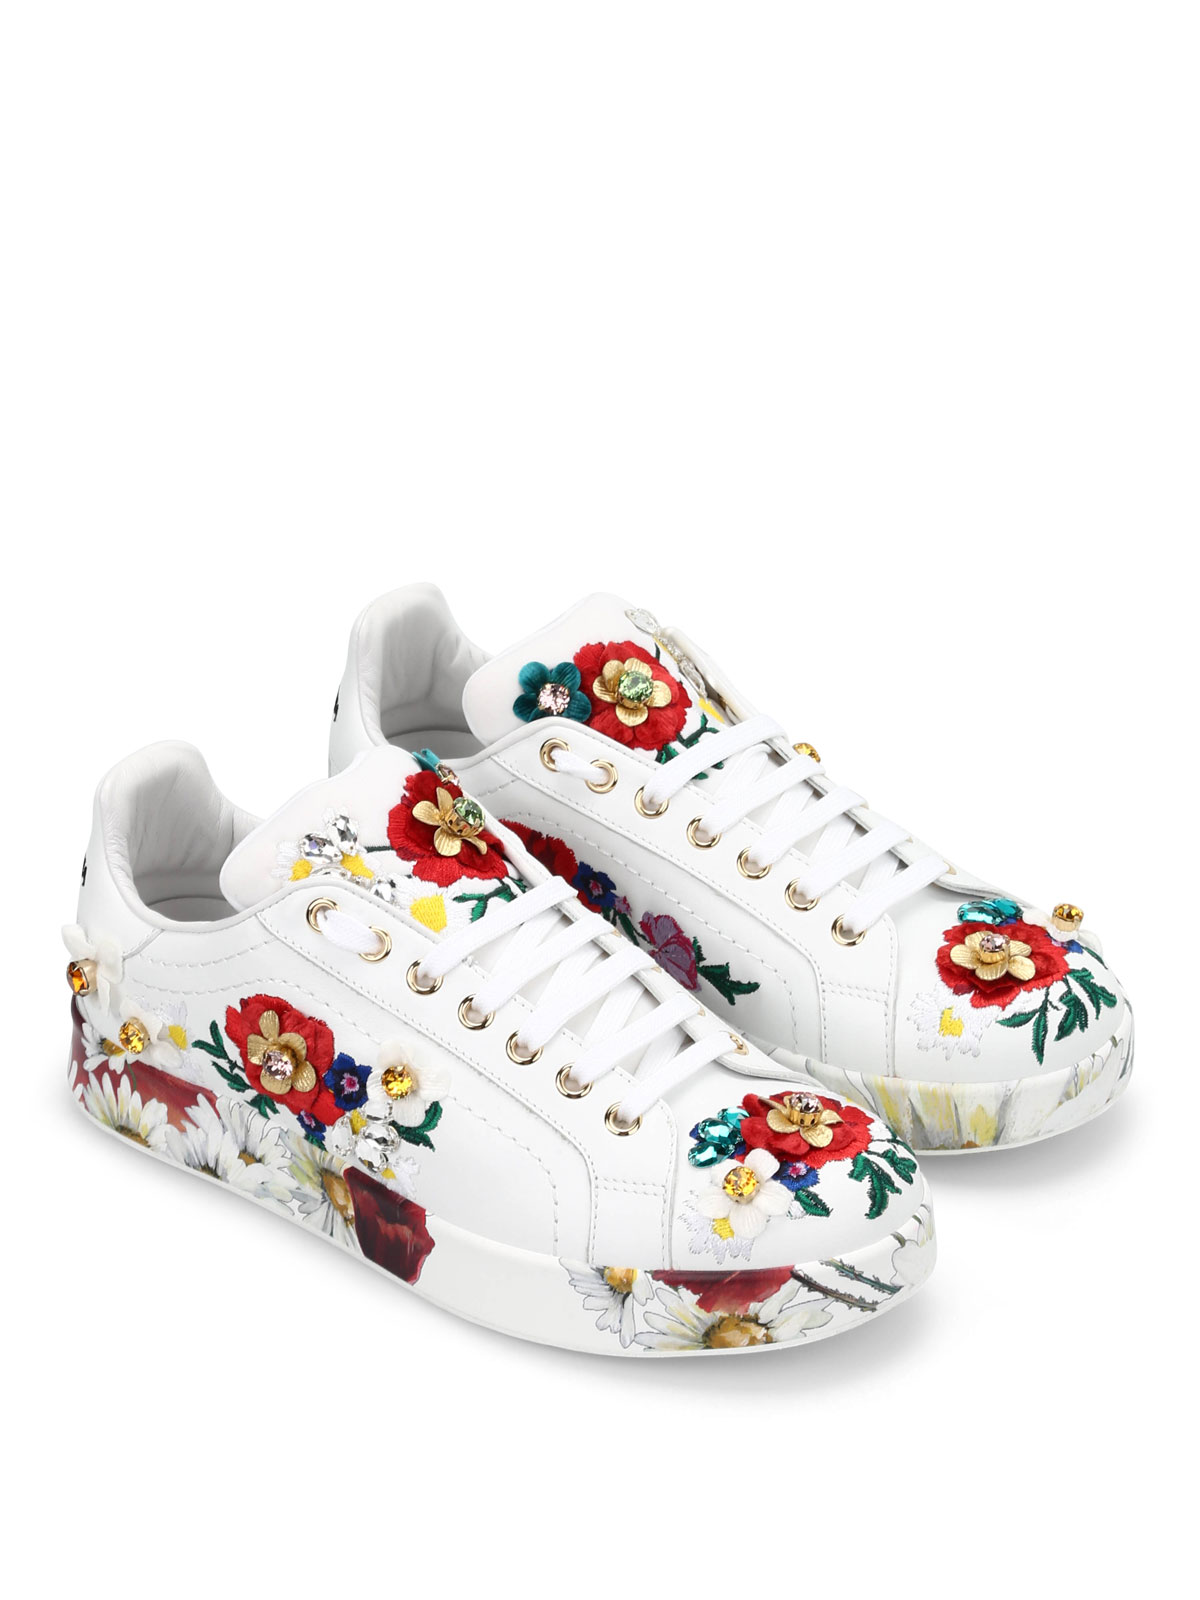 Trainers Dolce & Gabbana - Floral embroidered sneakers - CK0058AD19580001